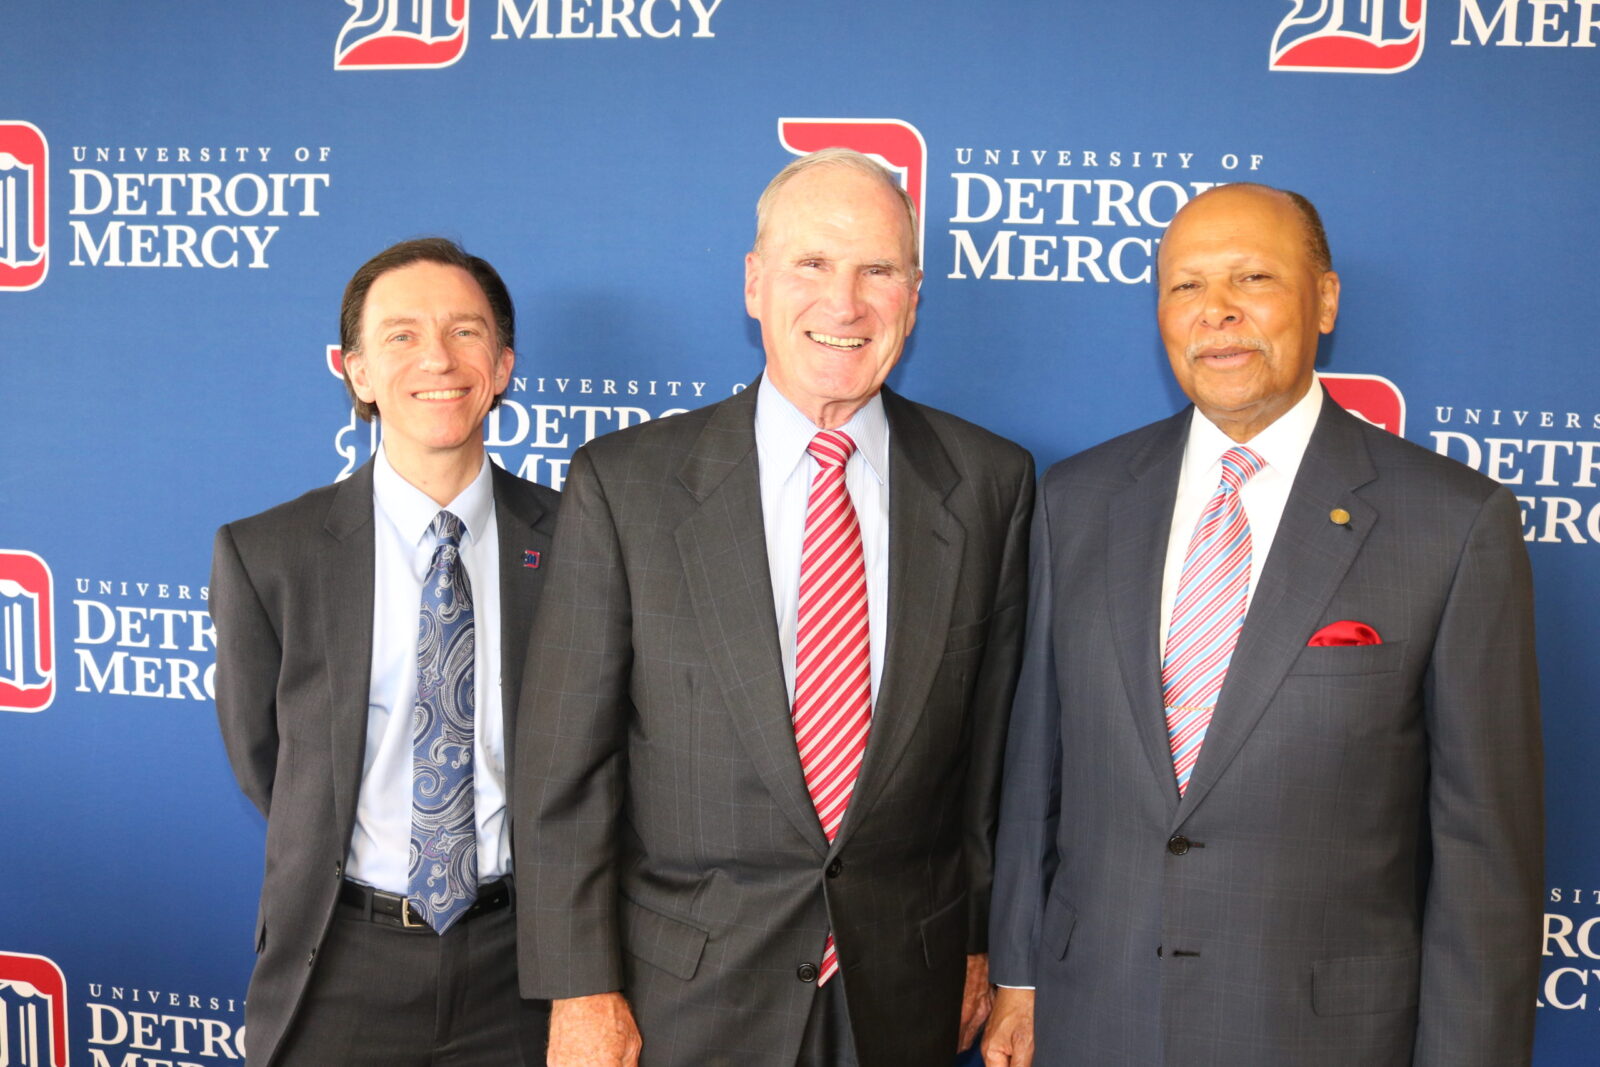 Dick Charlton at a University of Detroit Mercy event.